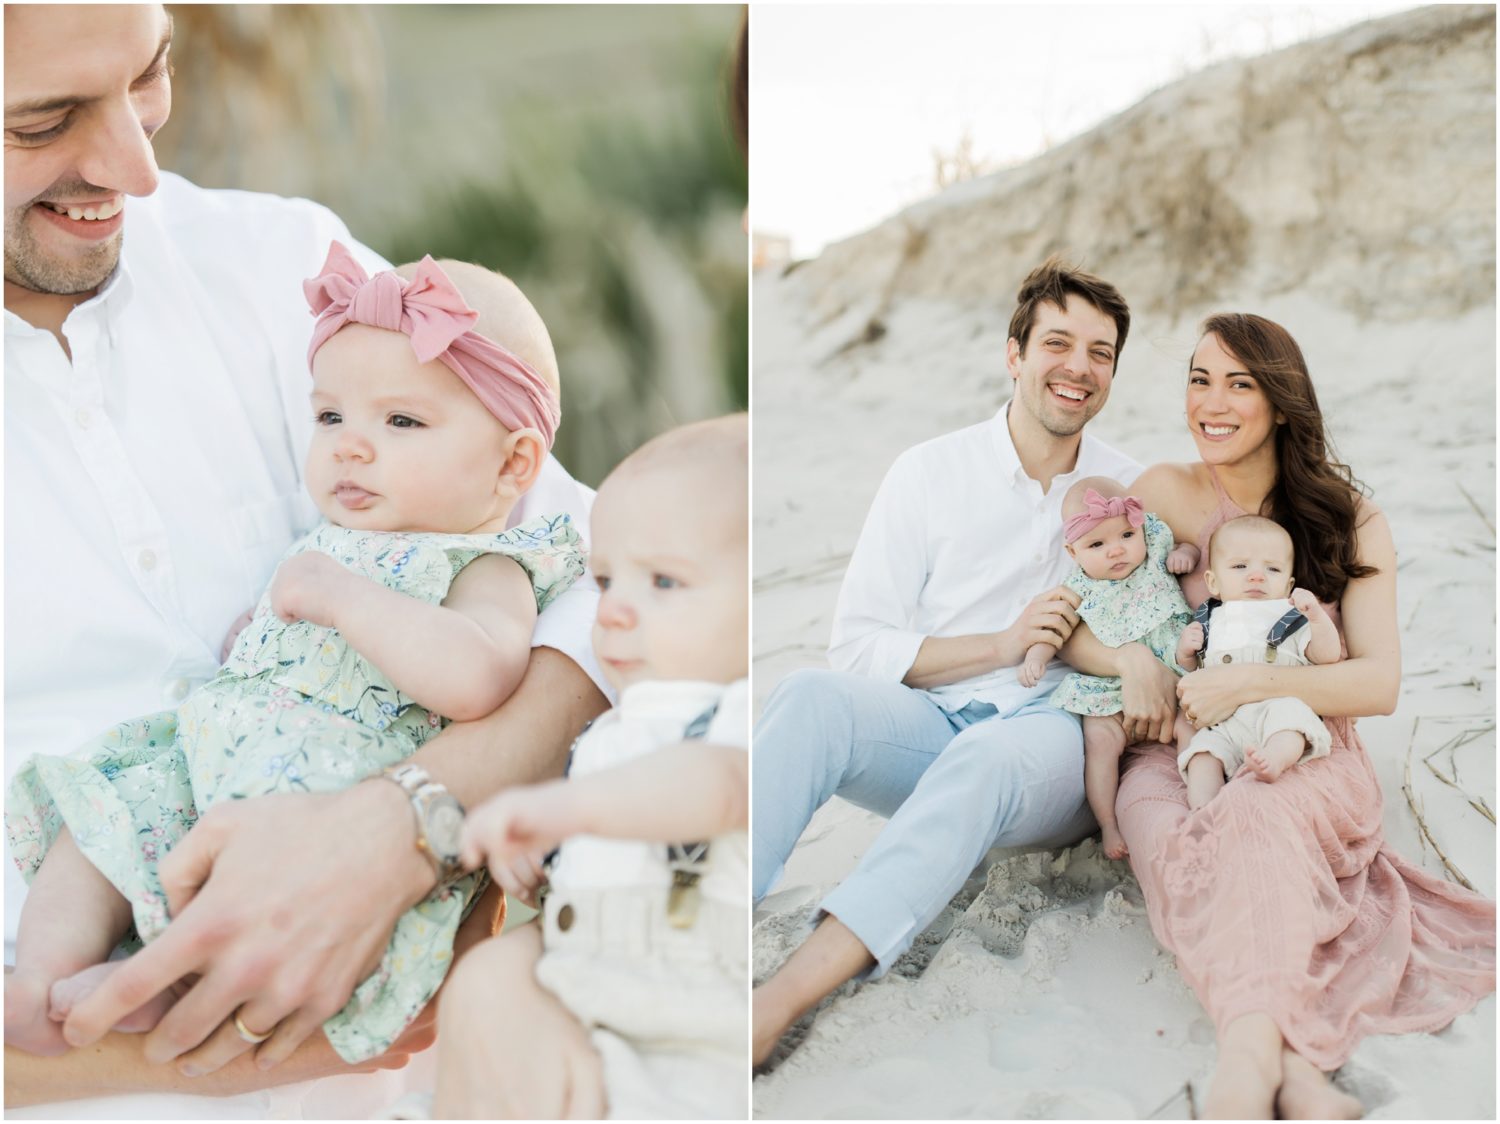 Jacksonville Lifestyle Photographers, Brooke Images, Family Beach Session, The Gerald's Family Session